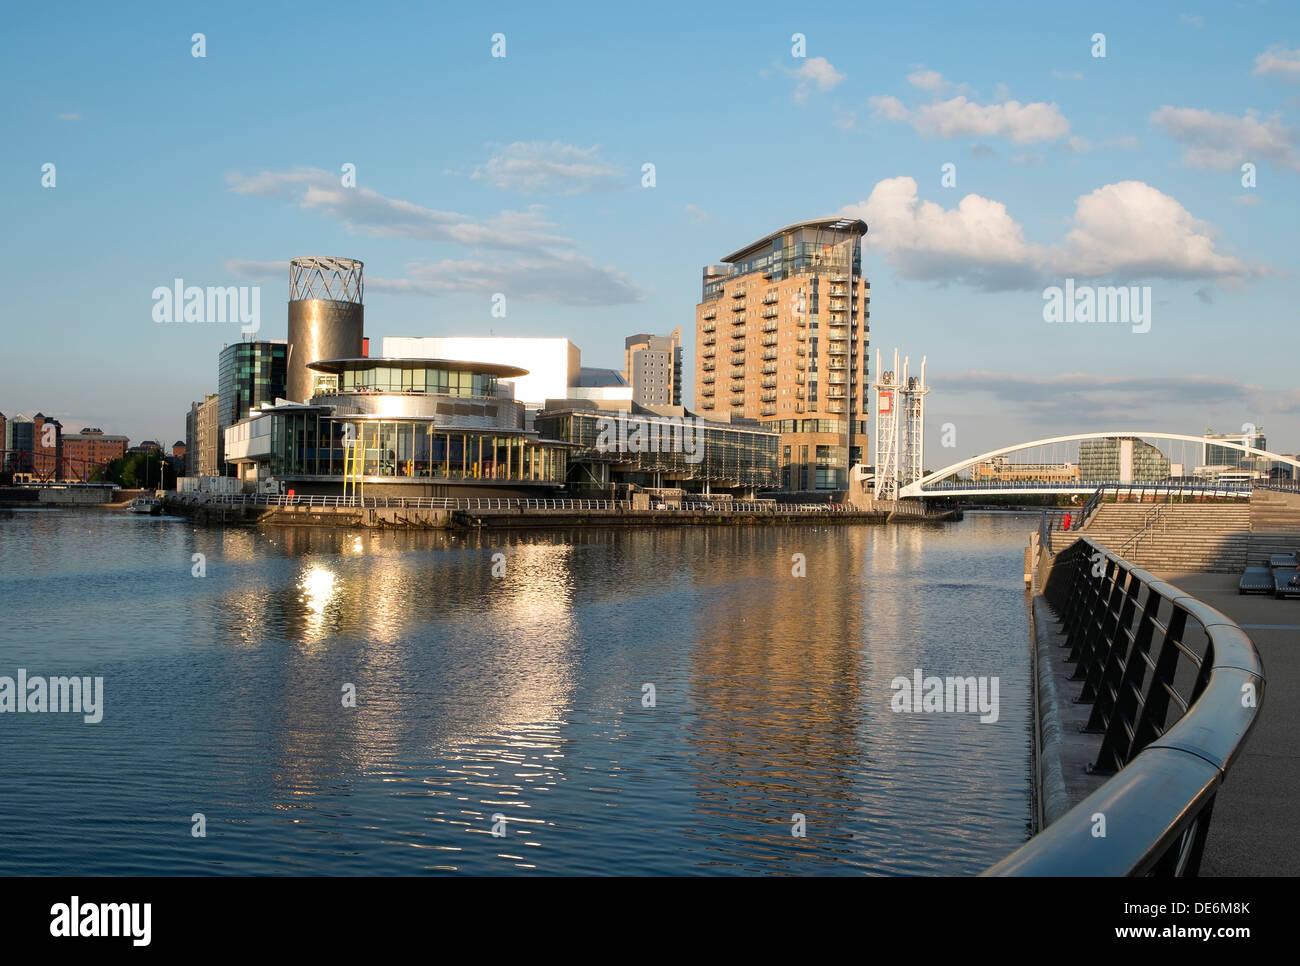 England, Greater Manchester, Salford Quays, Lowry Theatre and Lowry Bridge Stock Photo